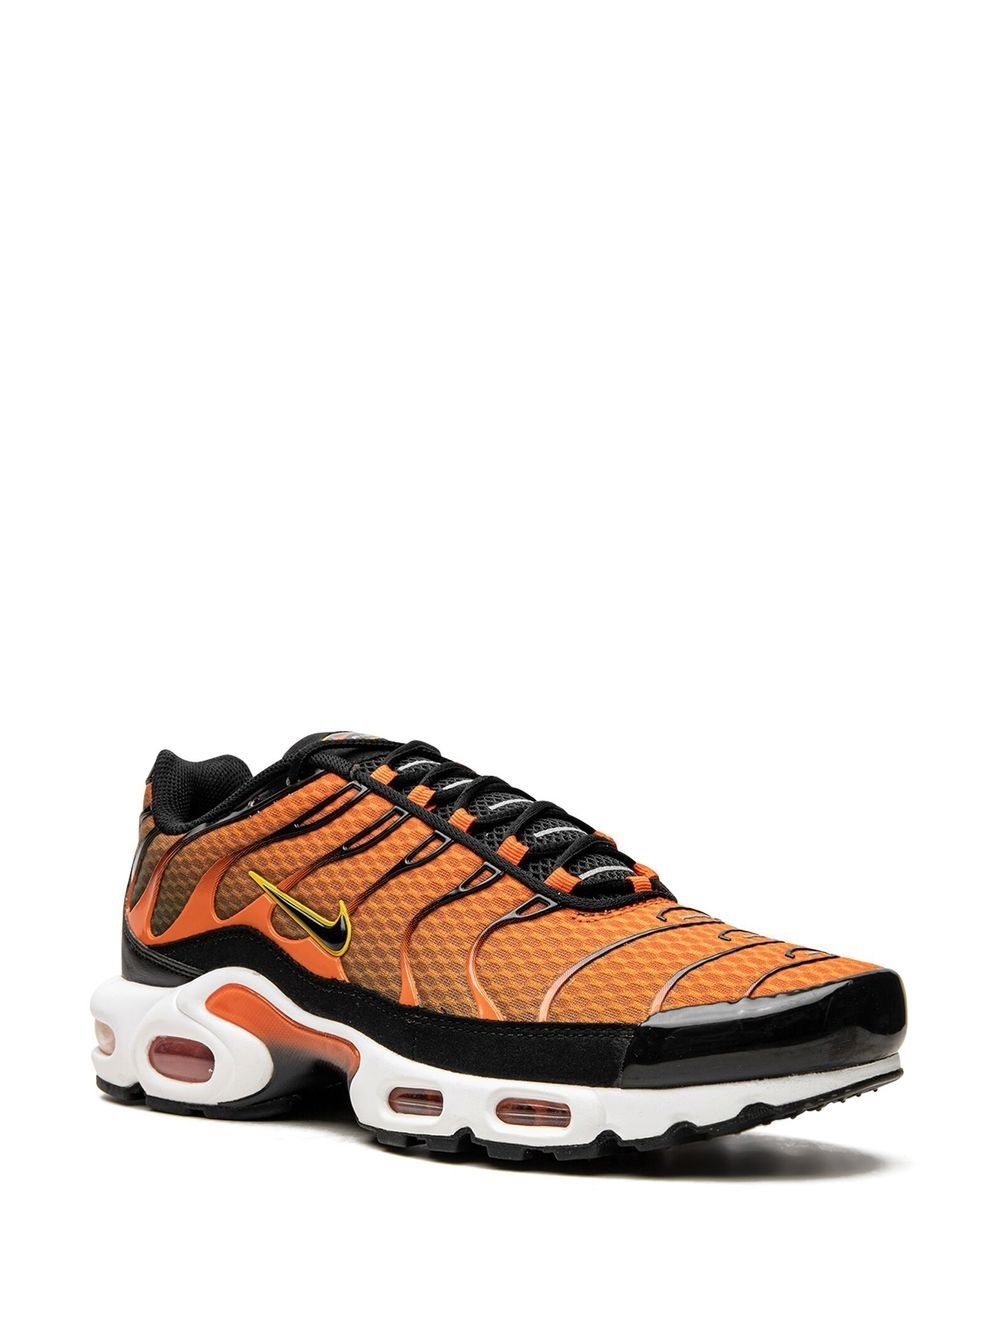 Air Max Plus "Safety Orange/University Gold" sneakers - 2